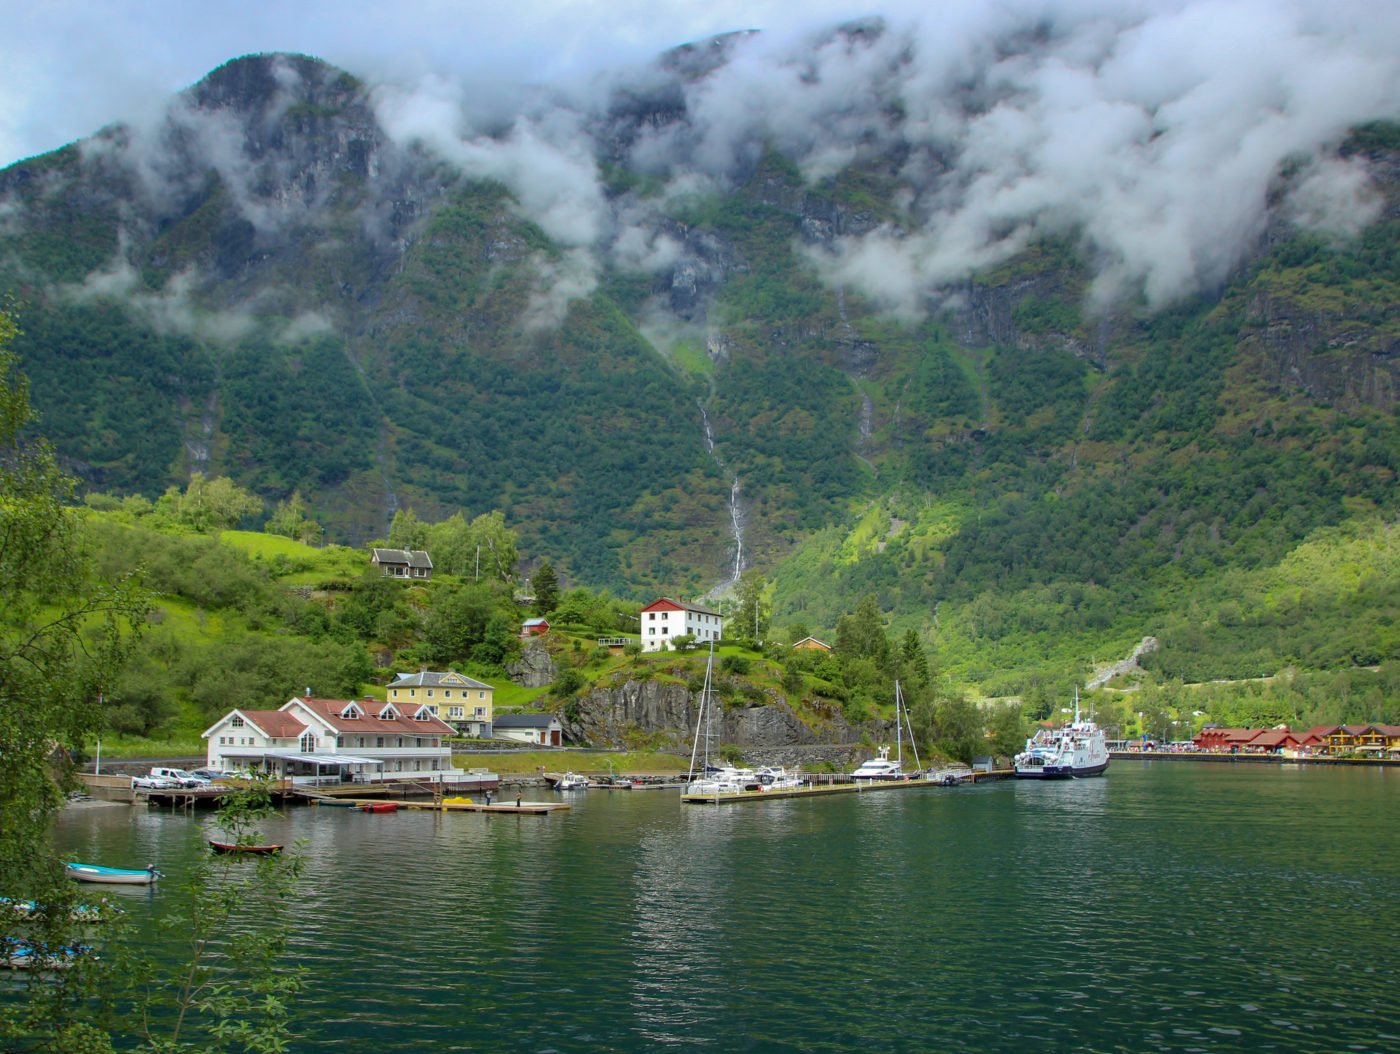 Magnificent Flam, Norway Attractions – Famous Flam Railway and Naeroydalen Valley